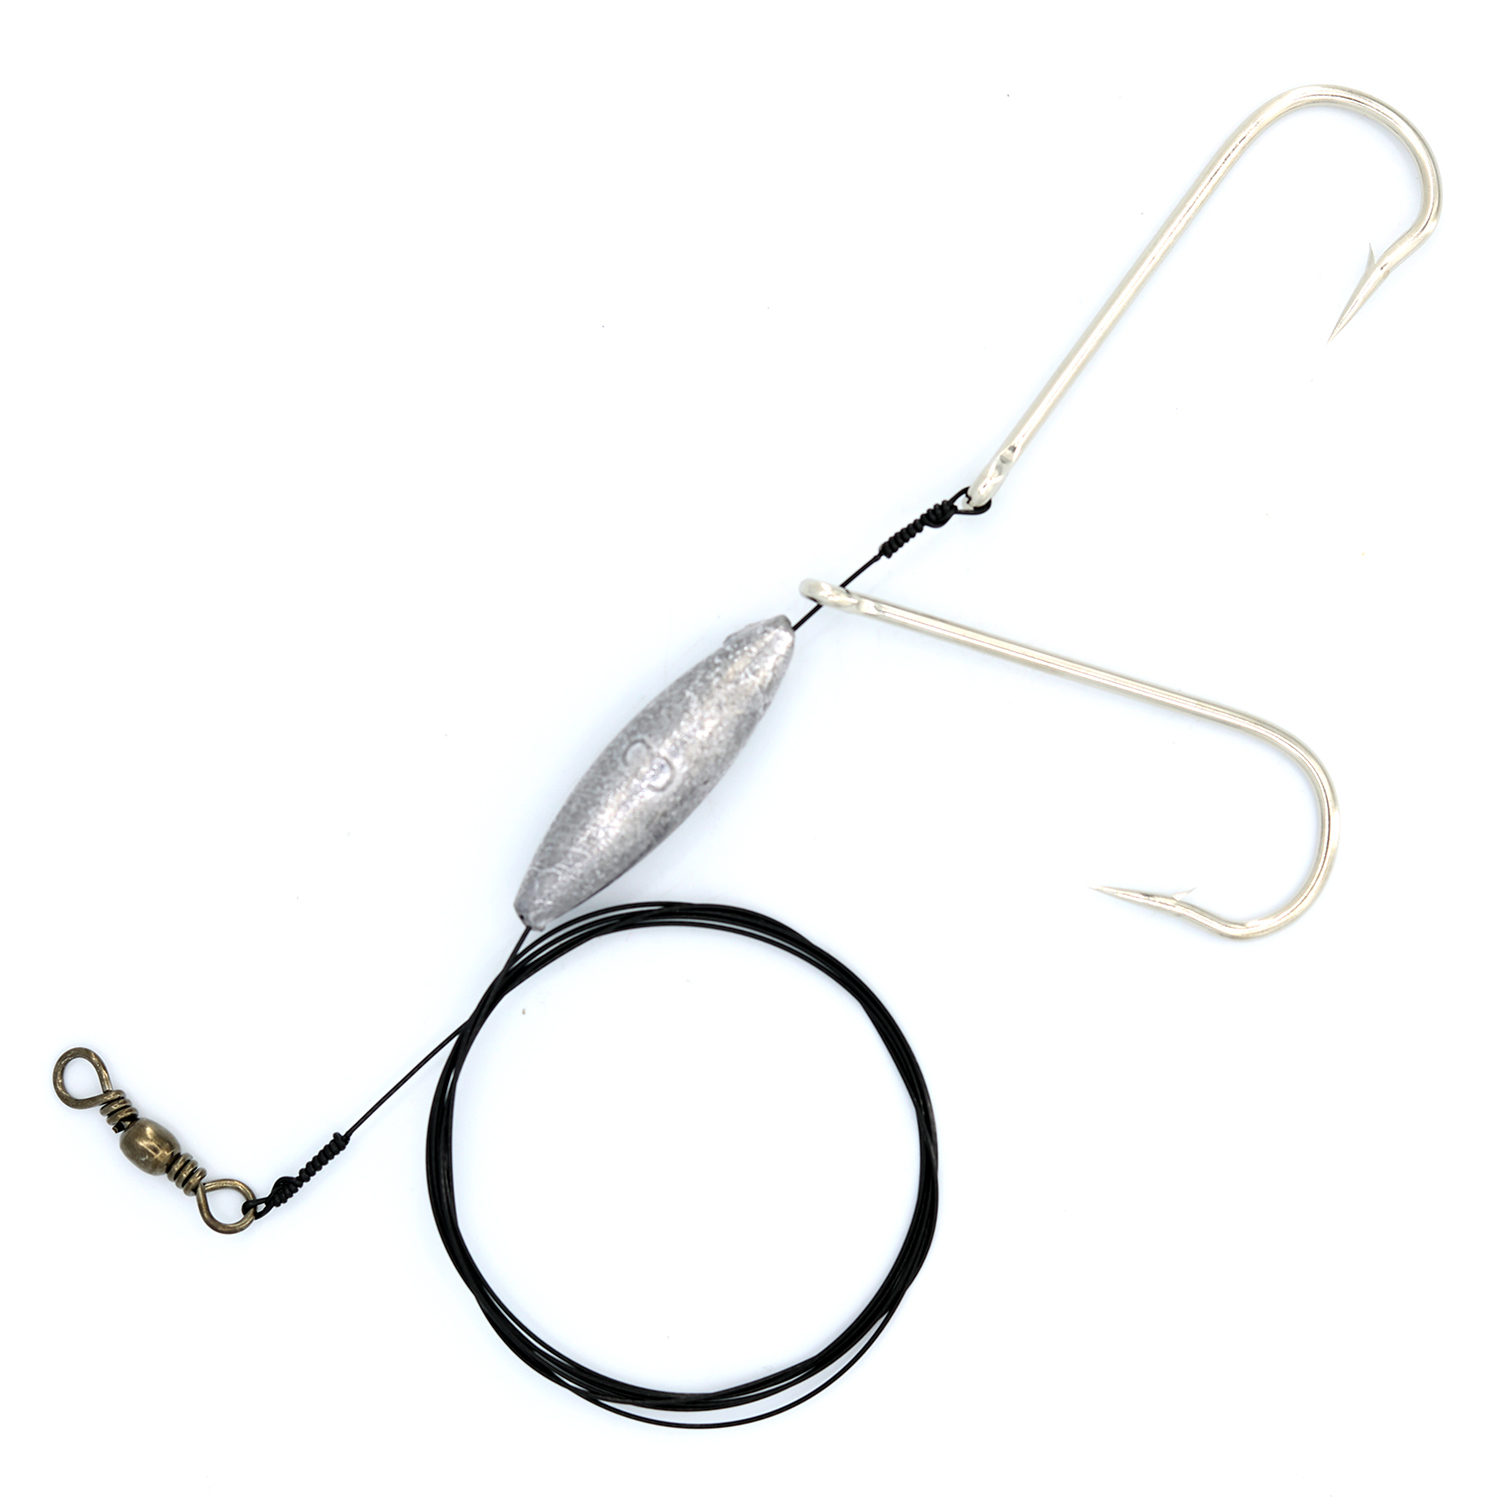 qareb american wire rig with double hooks size 2, sinker size 3 and wire test 90lb